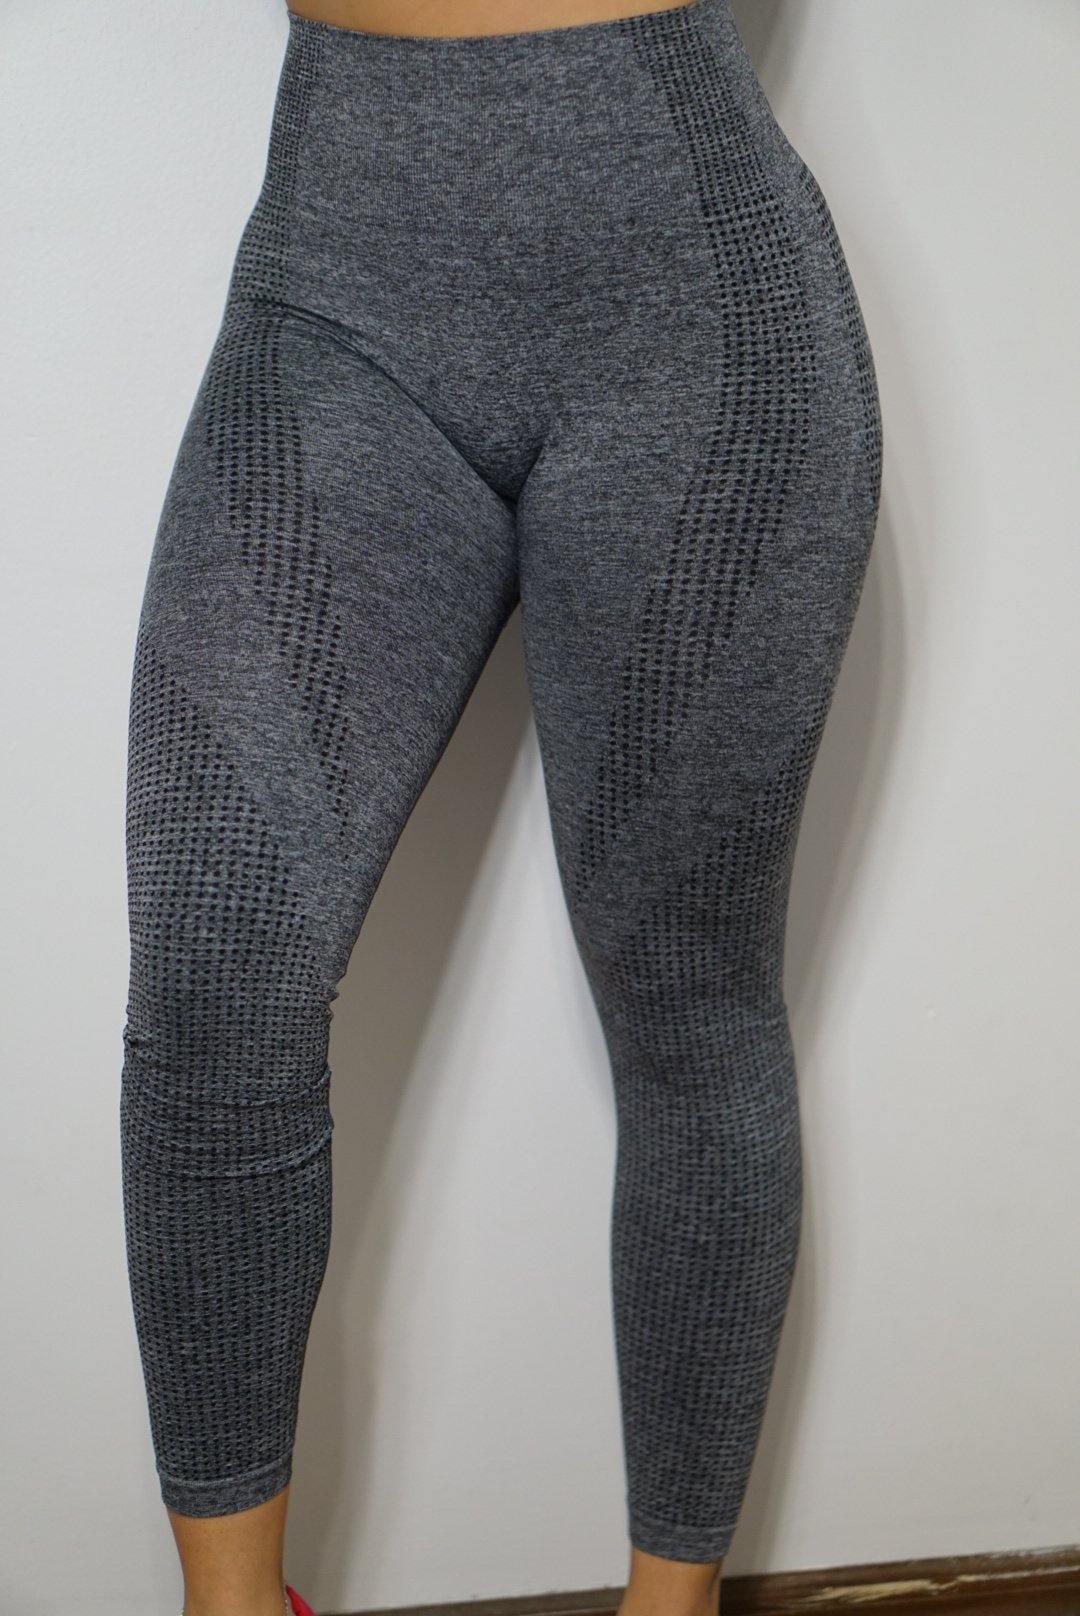 Ark Compression Leggings- Grey - The Omega Fitness Workout Apparel